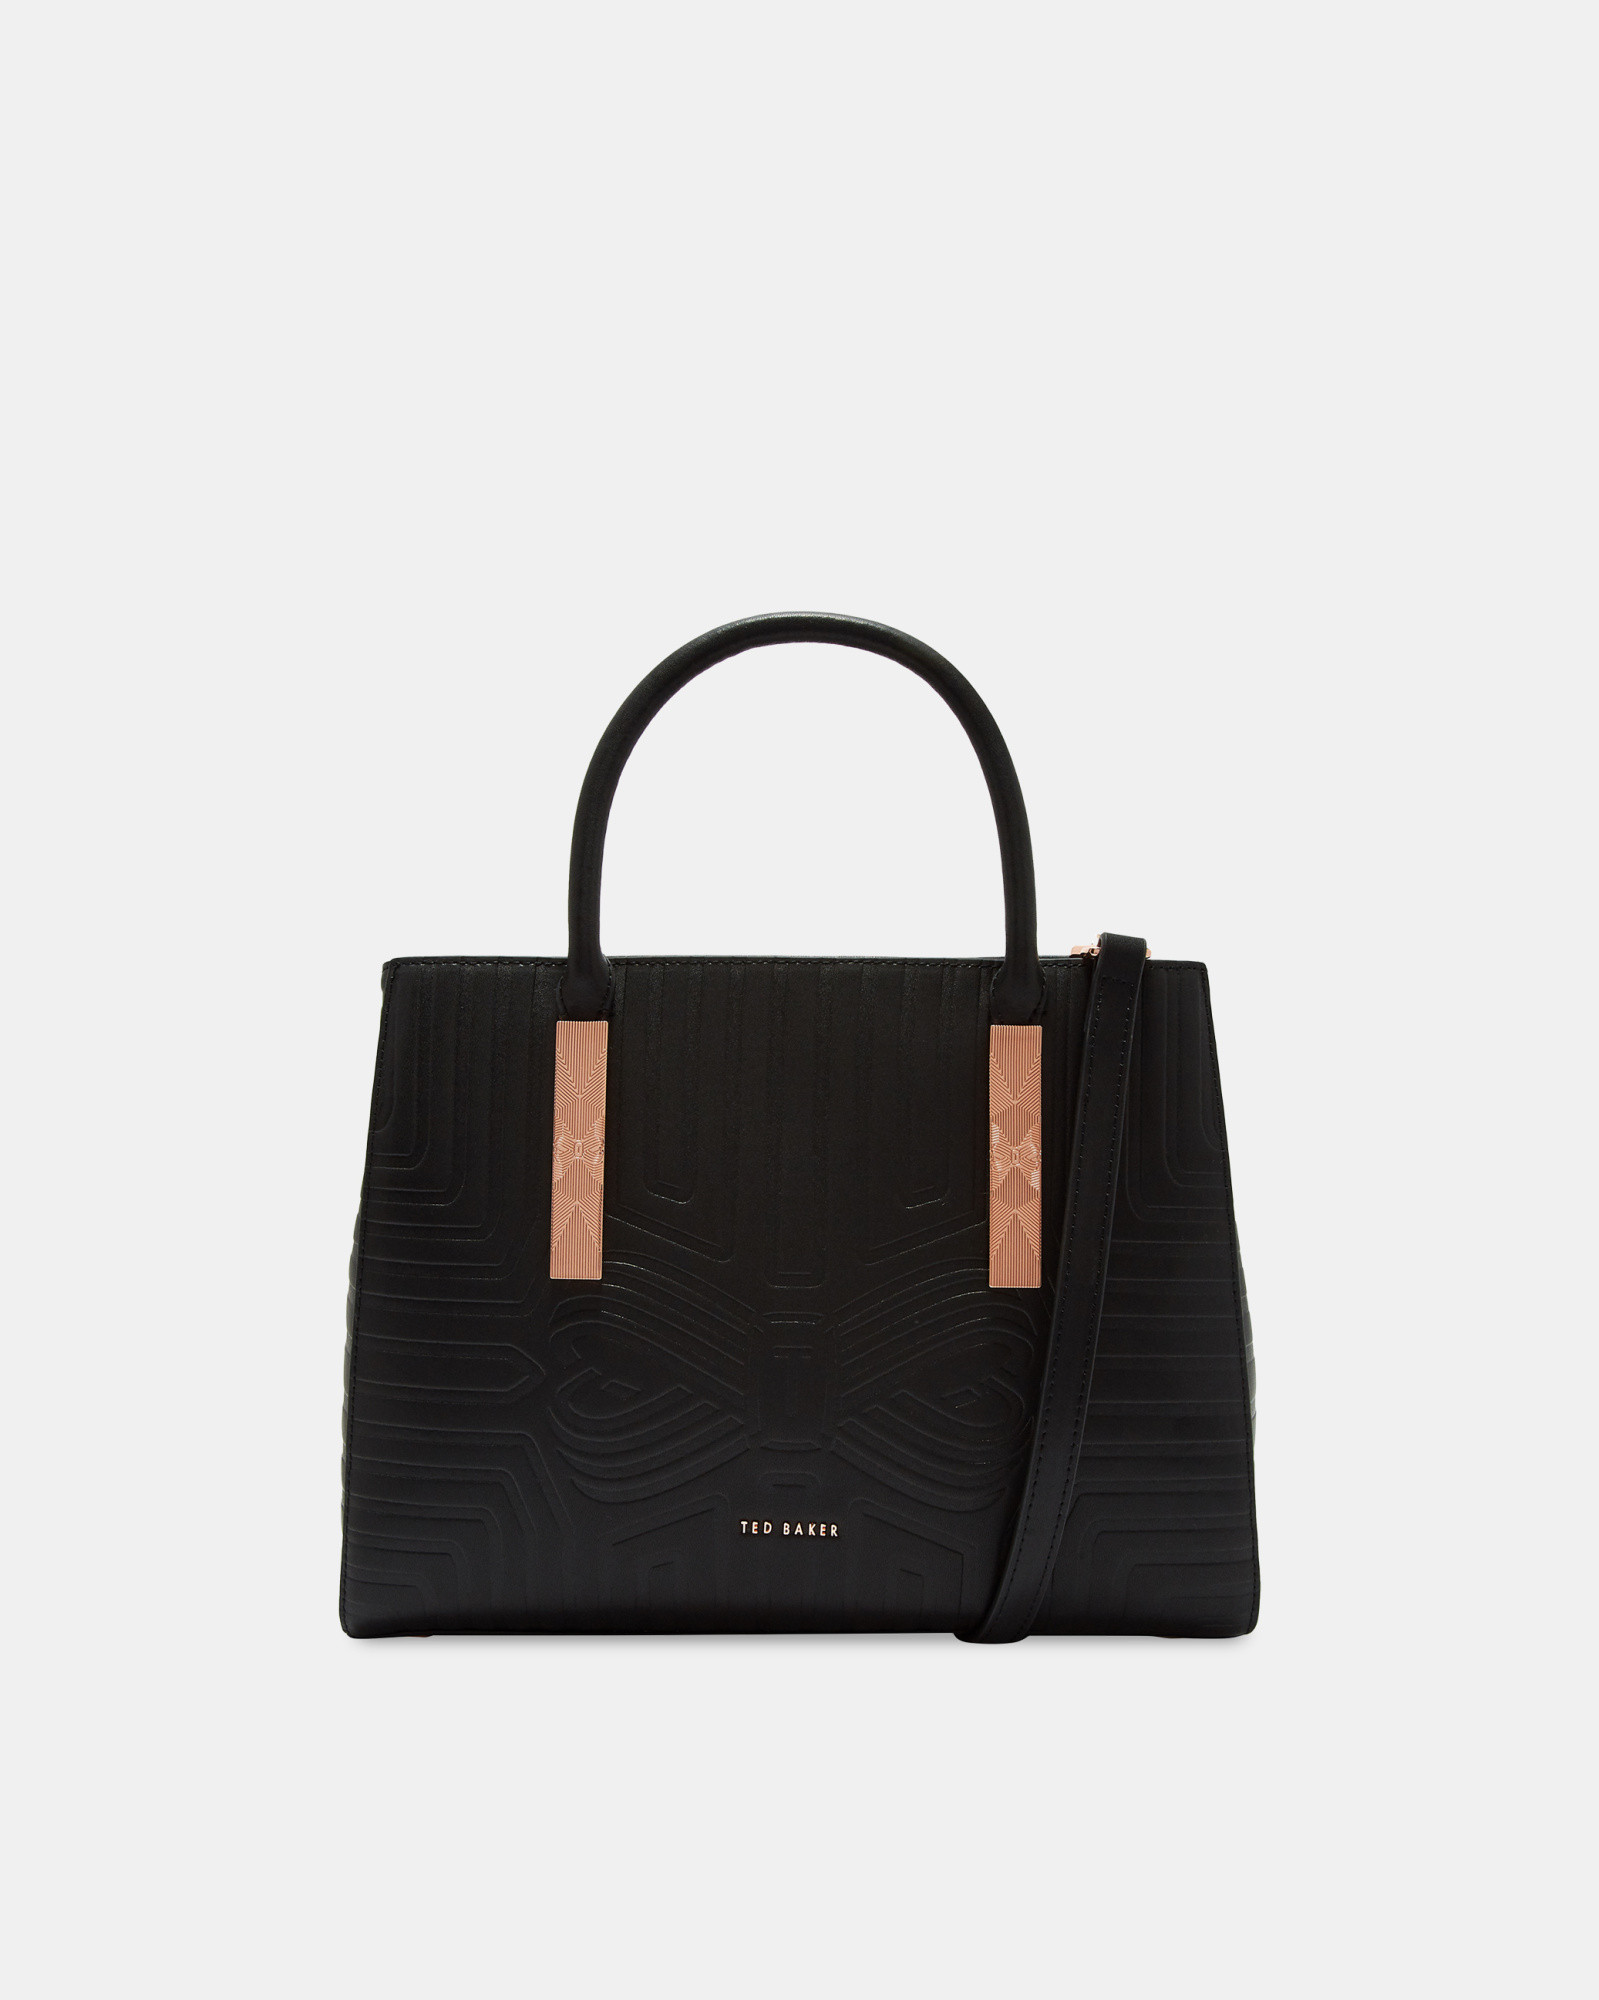 JESICCA Bow embossed leather tote bag